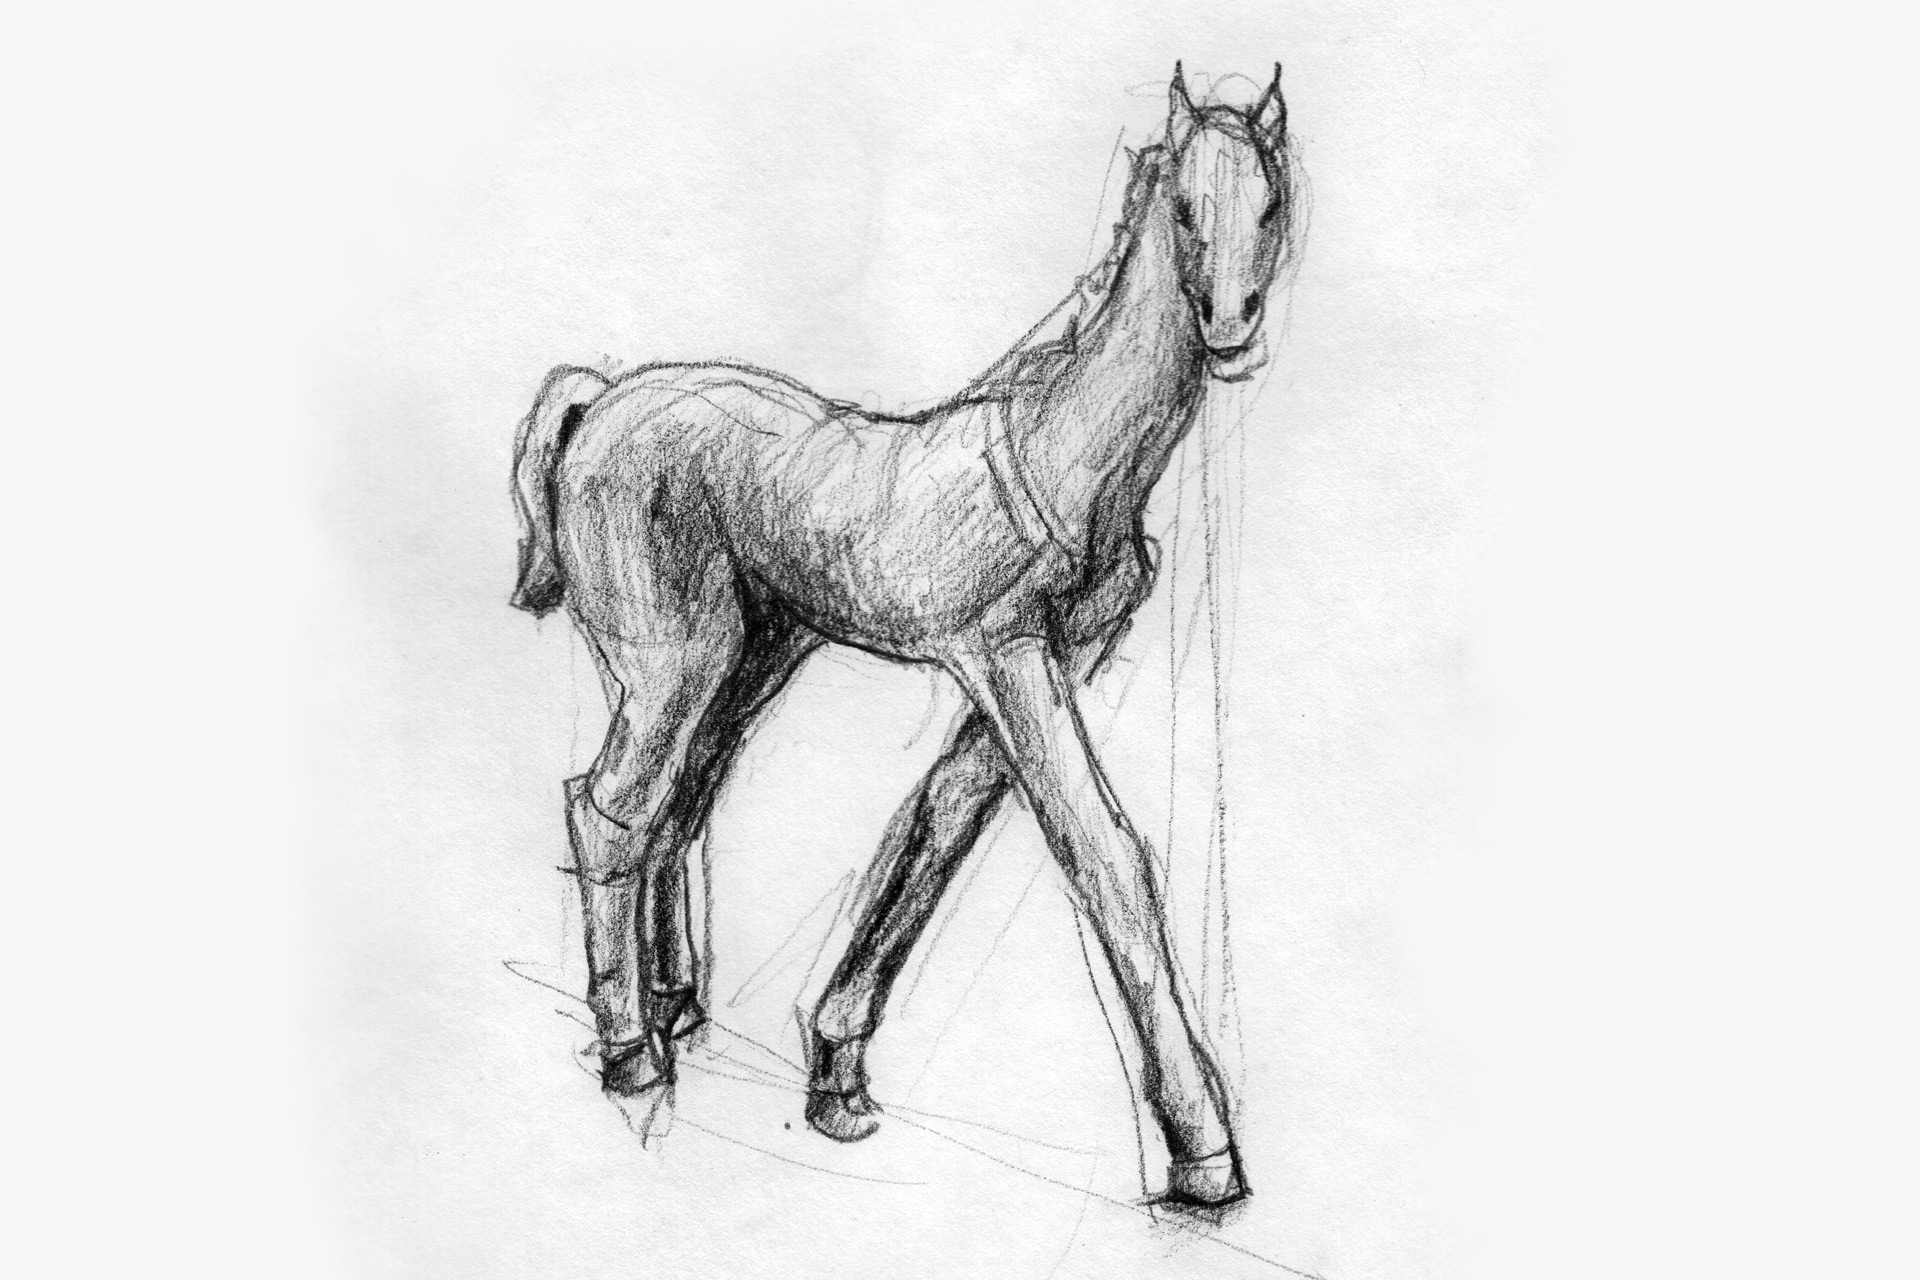 ... inspired by the marvelous sculpture of a filly, made by renée sintenius